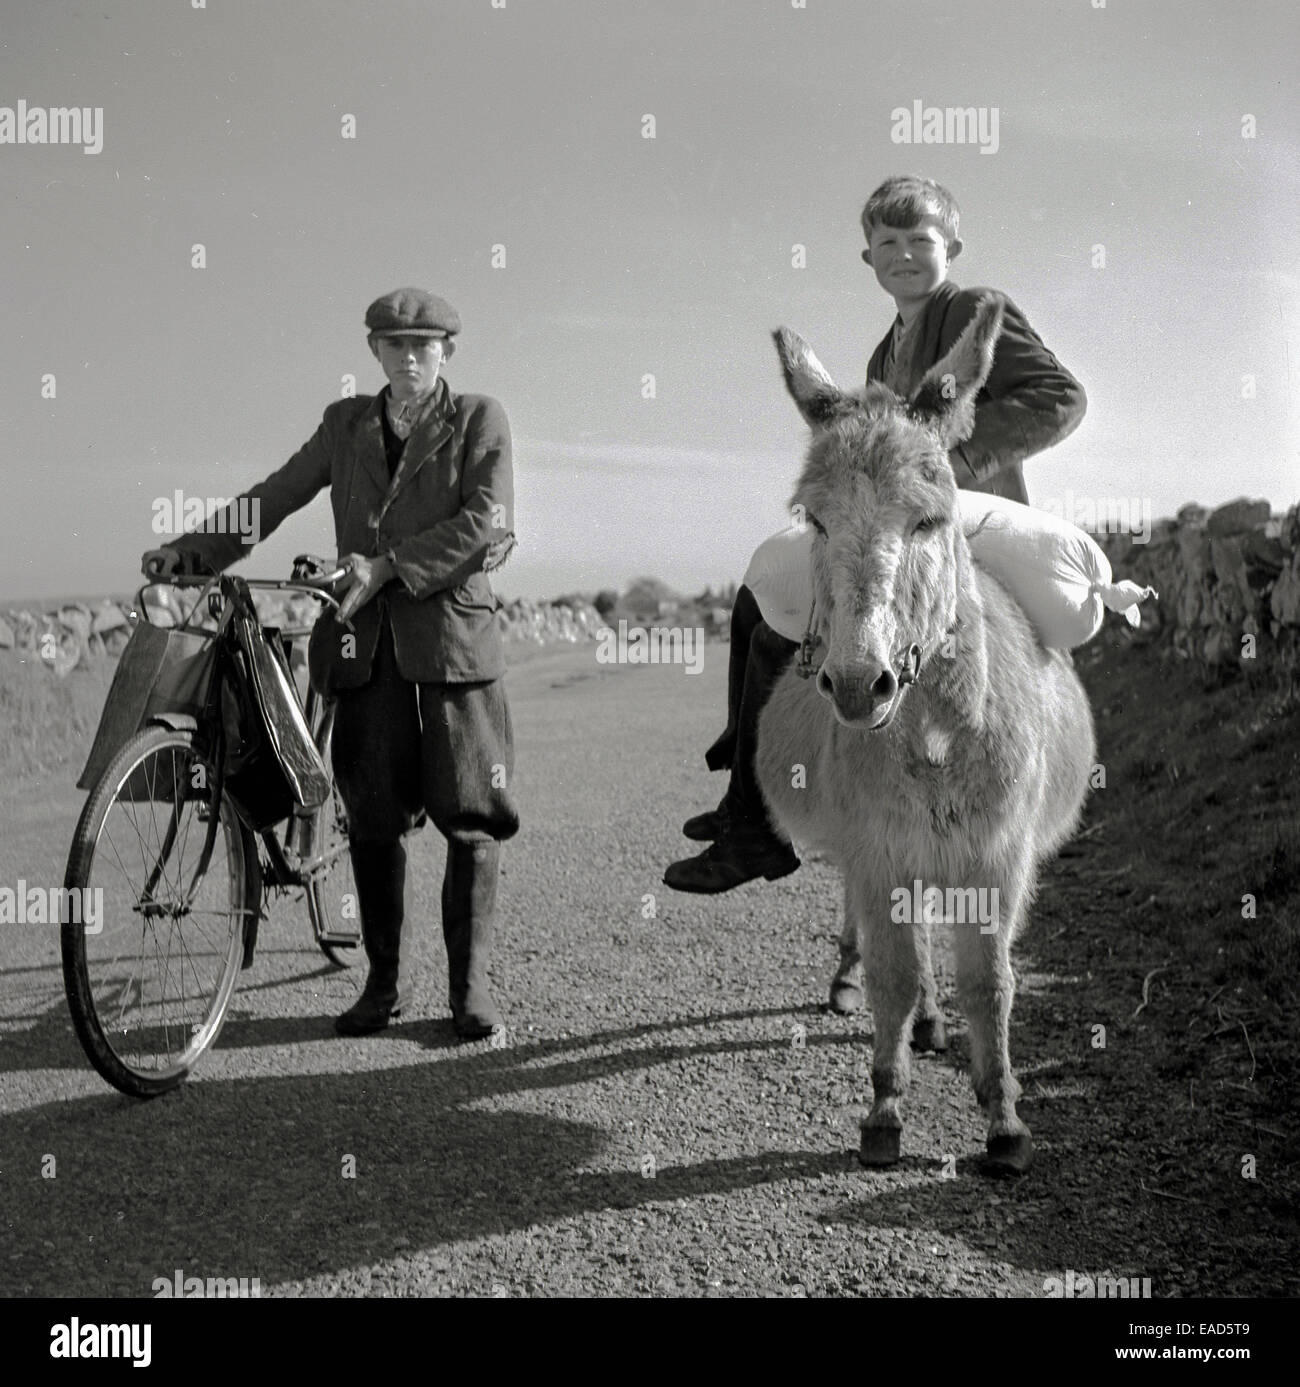 1950s, historical picture by J Allan Cash of two Irish boys outside on a rural country lane. One in plus-fours and a cloth cap is standing with his bicycle with shopping bags over the handlebars, while other boy is perched on a donkey, carrying a bag of flour, Ireland Stock Photo